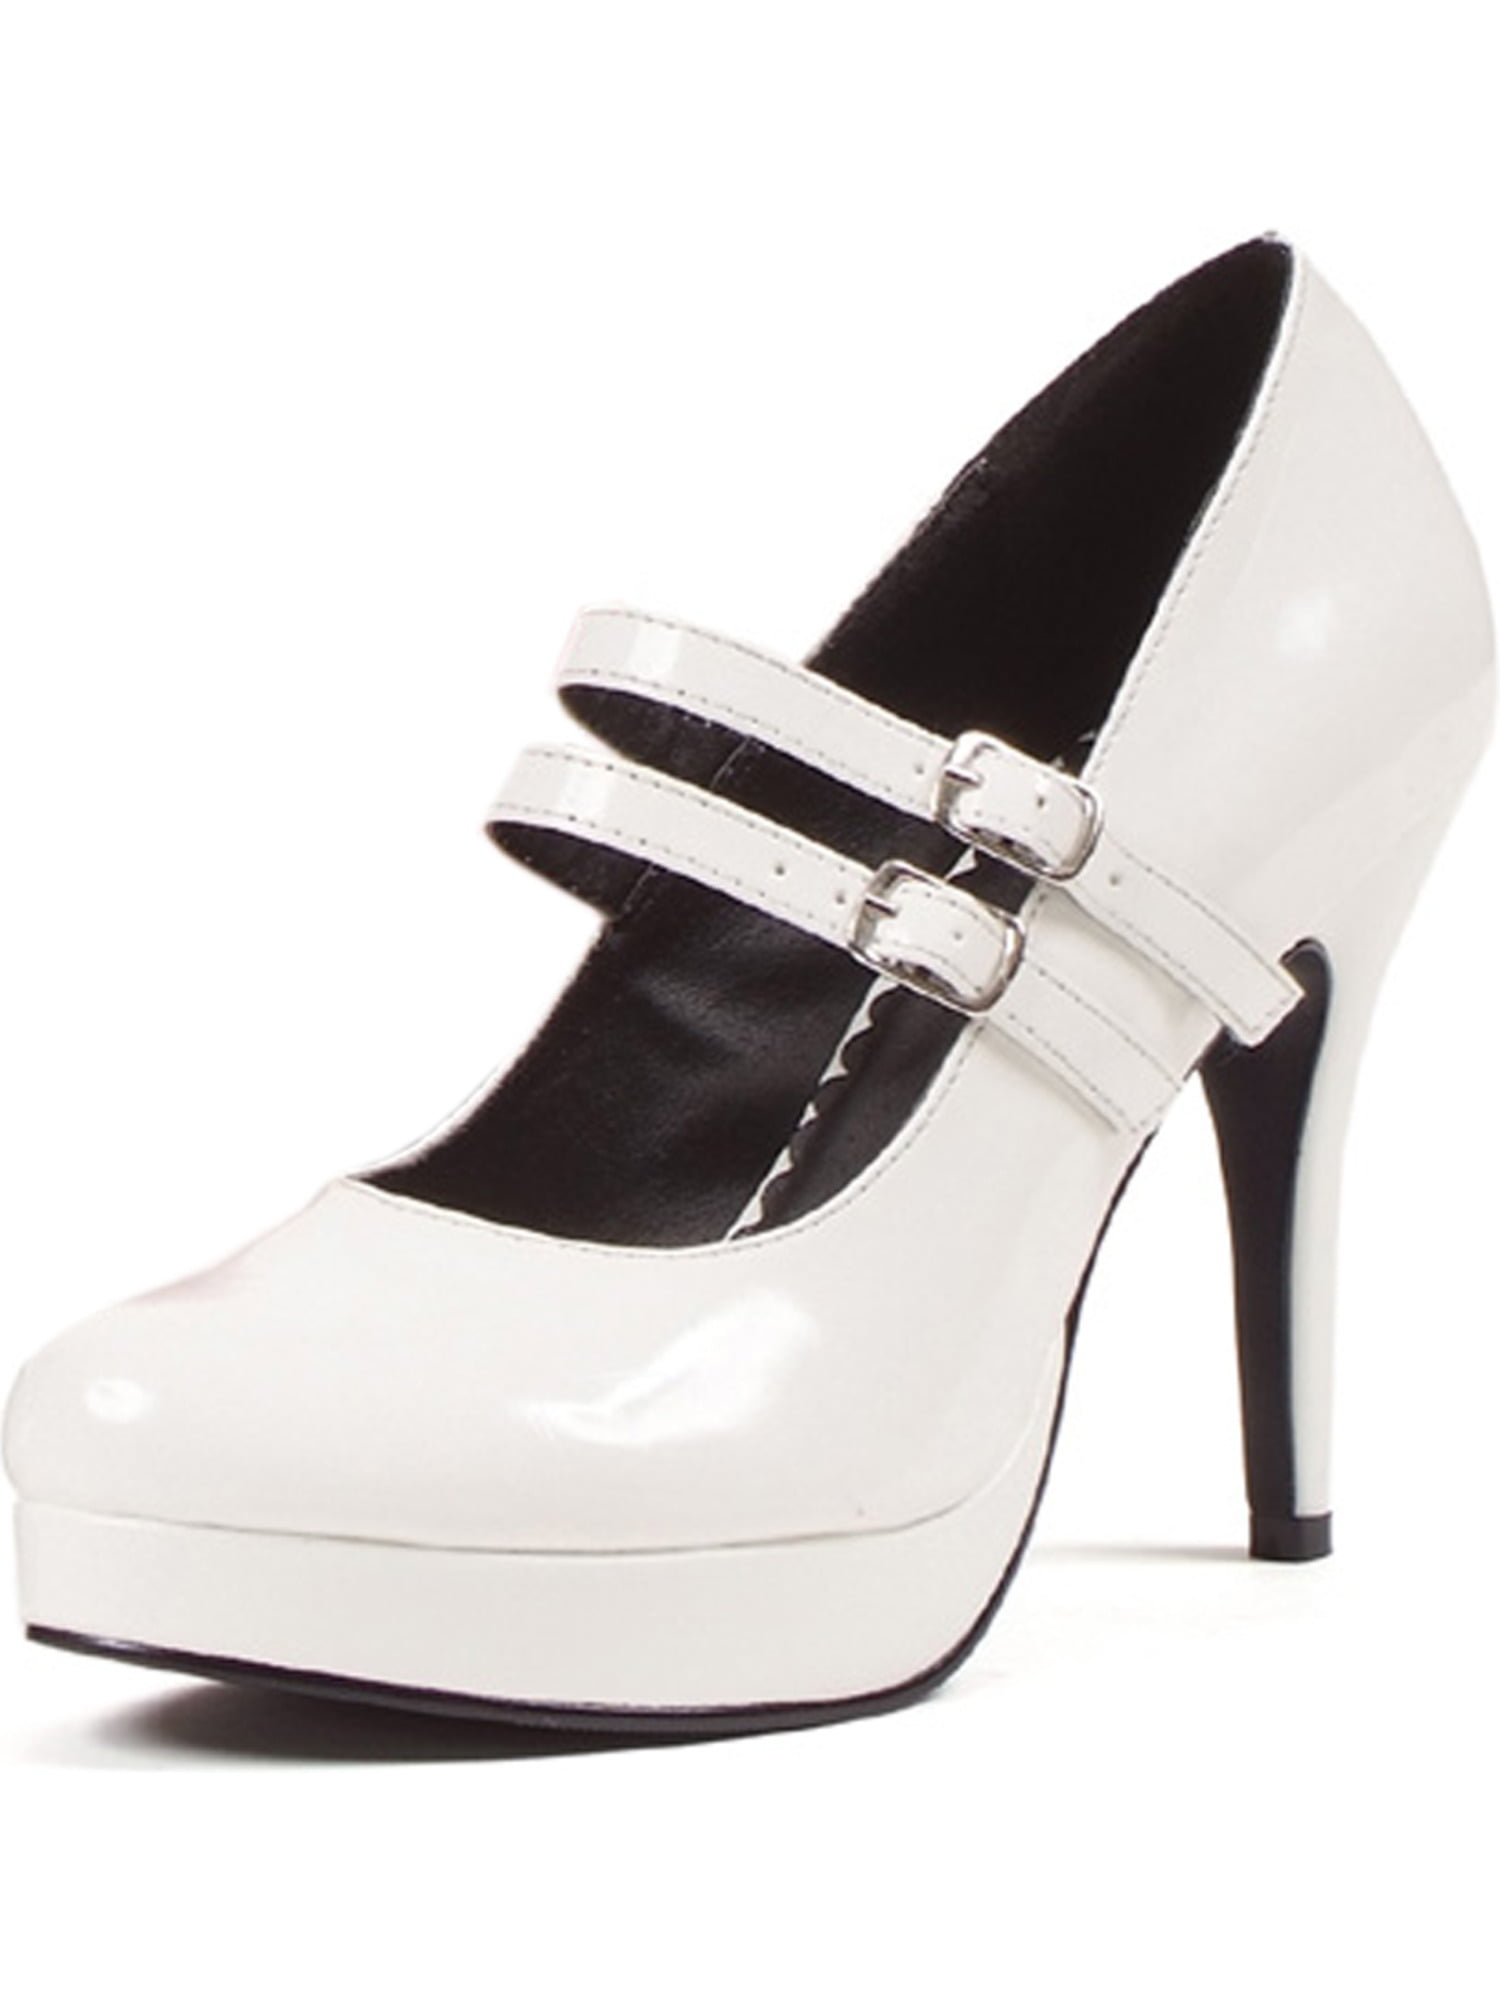 Womens White Mary Jane Pumps Double 